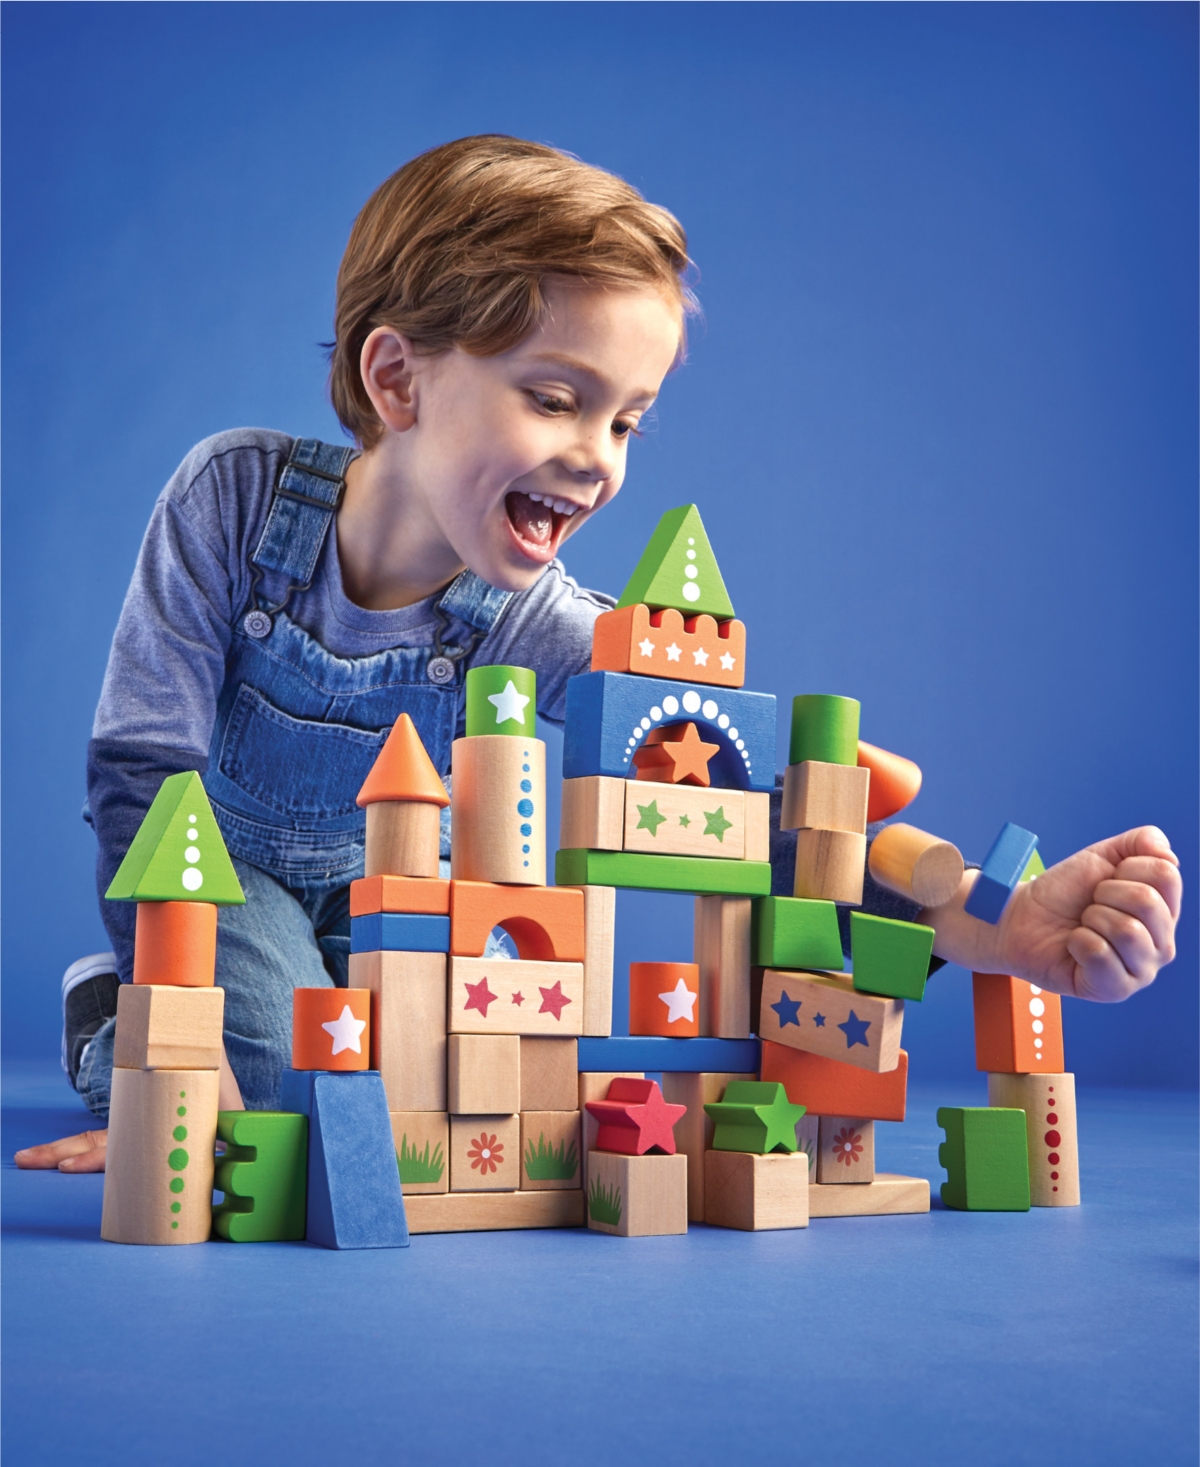 Shop Geoffrey's Toy Box Castle 70 Pieces Blocks Building Set, Created For Macy's In Pastel Brown